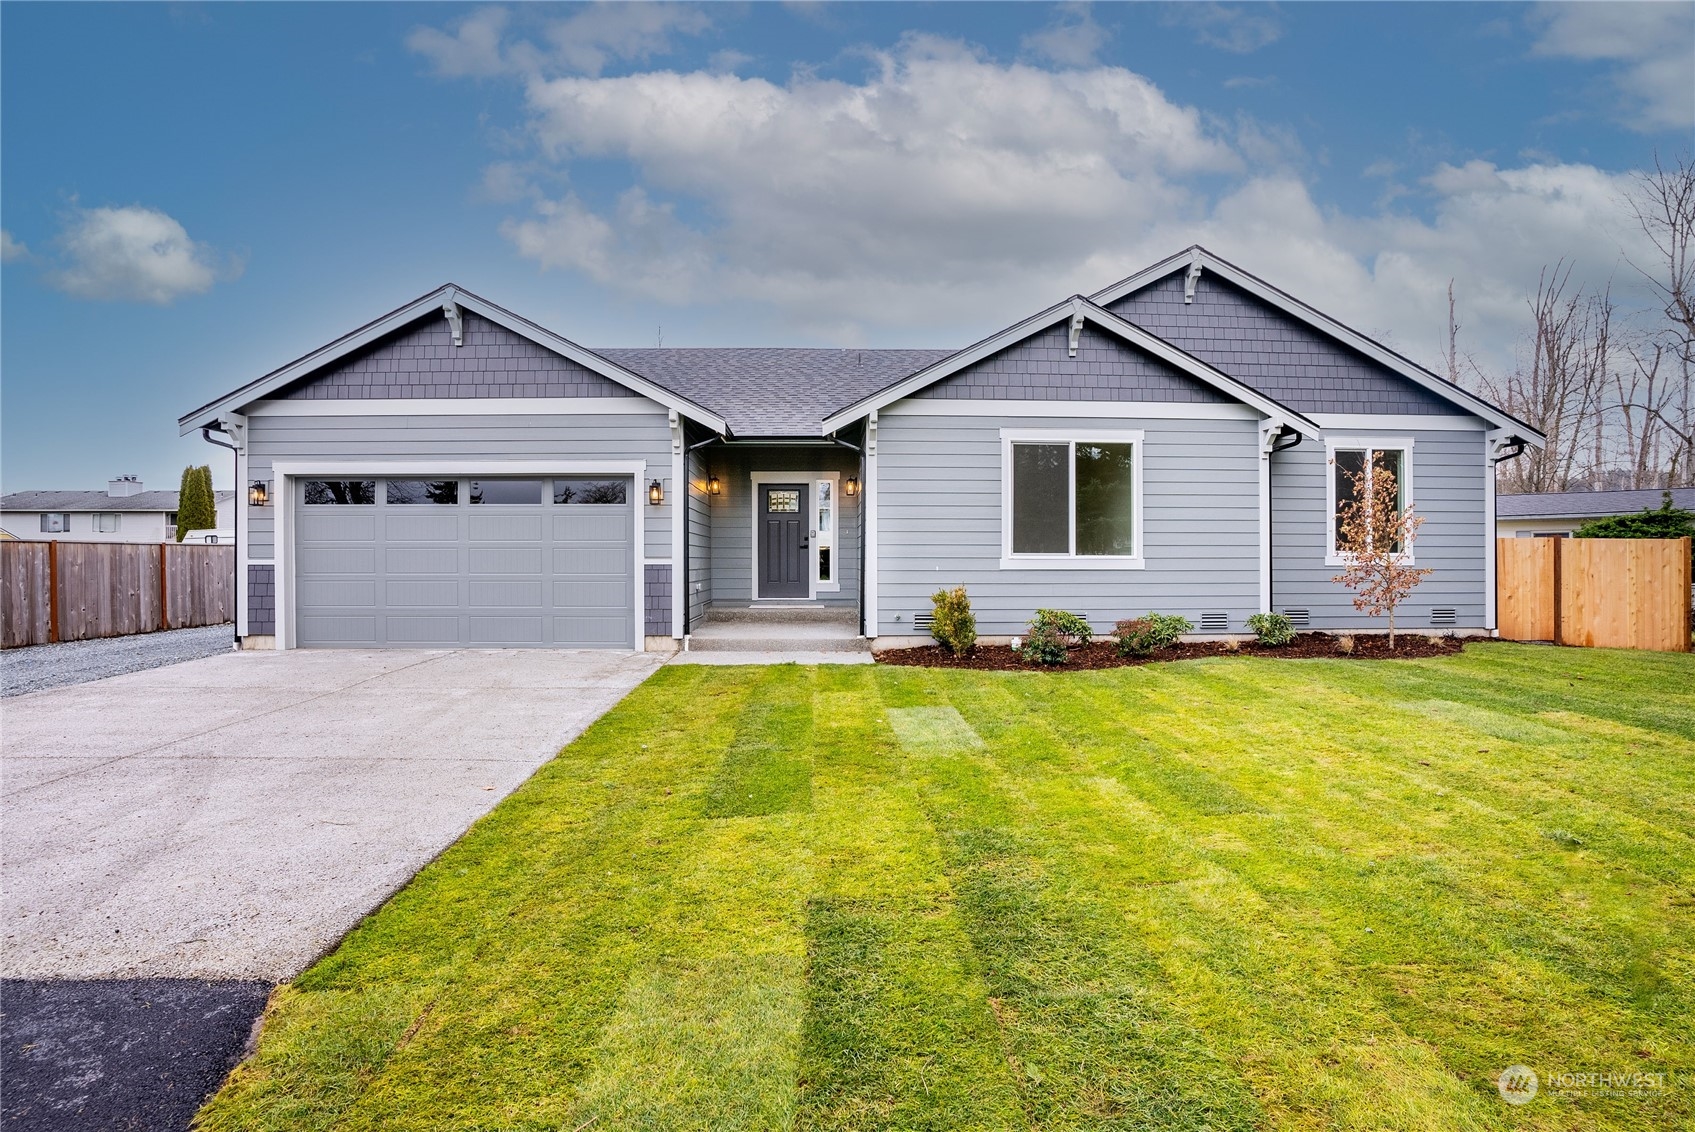 Pacific, WA Real Estate Housing Market & Trends | Coldwell Banker